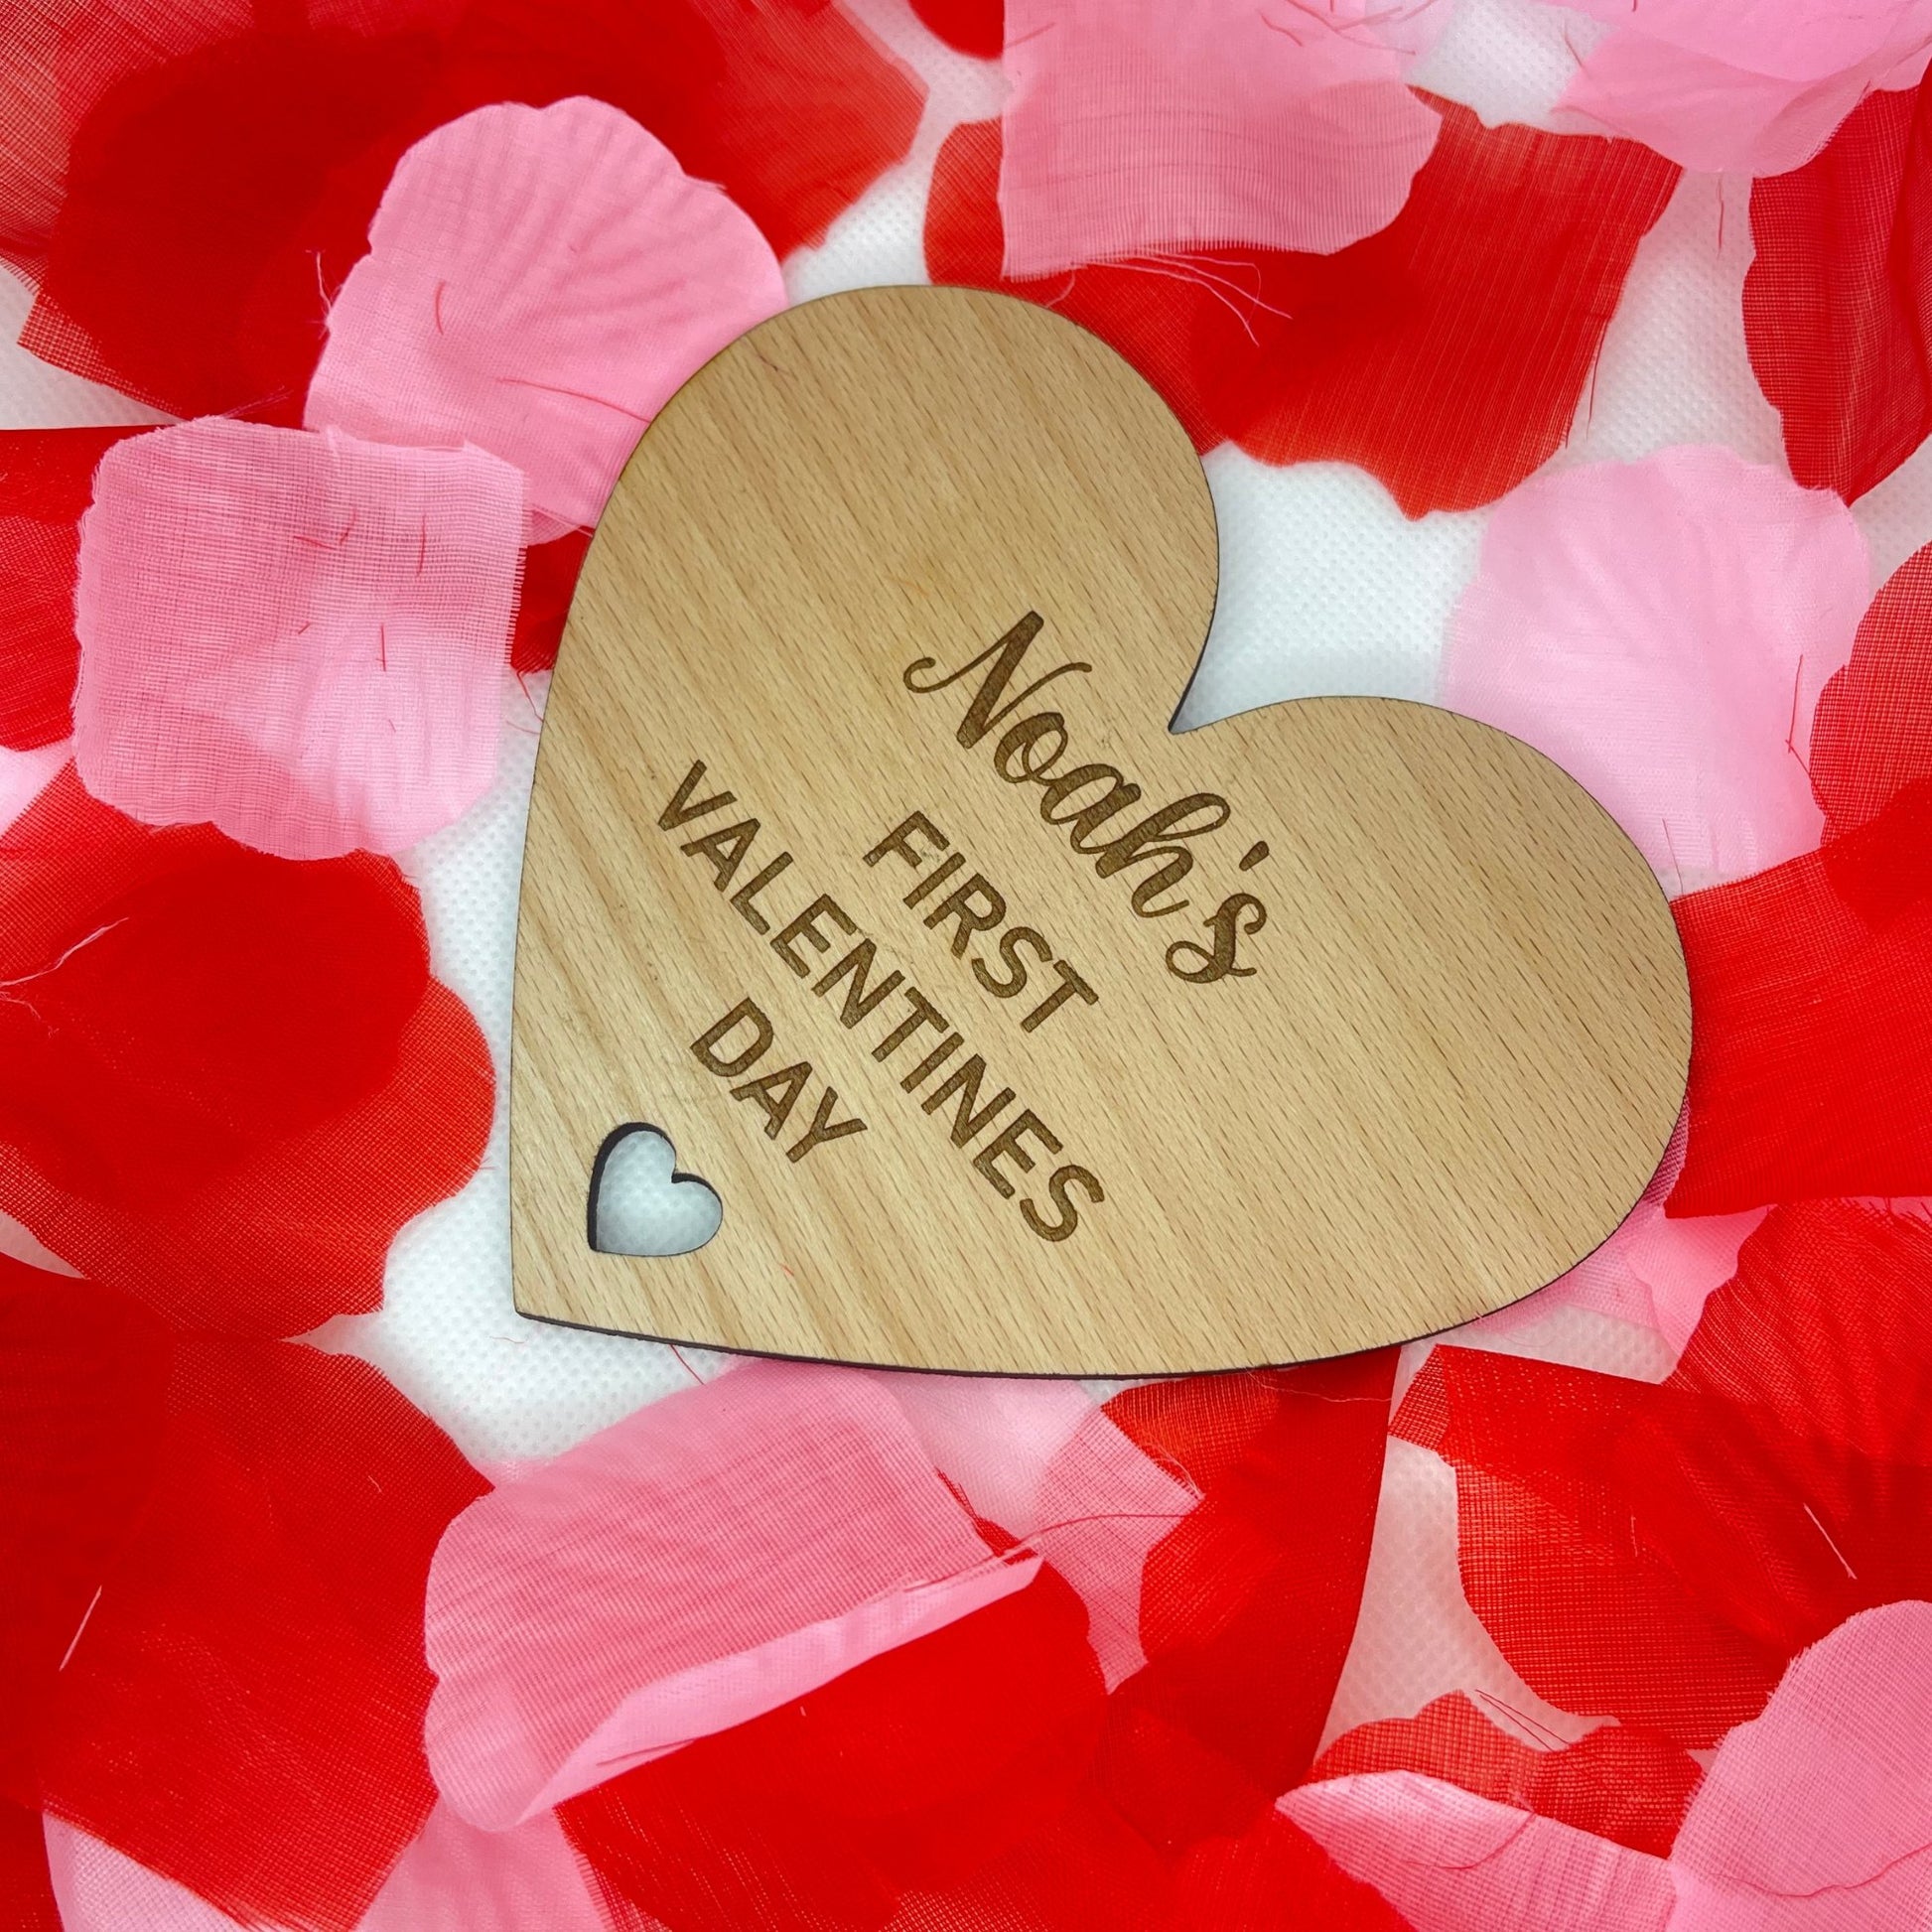 This is a lovely way to announce the arrival of your new beautiful baby to friends and family, Personalise your plaque with your baby's name. At the top of this product it says your babys name with first valentine's day after, this is a heart shaped wooden product. This would make the perfect first gift for new parents. A beautiful addition to any baby photographs.